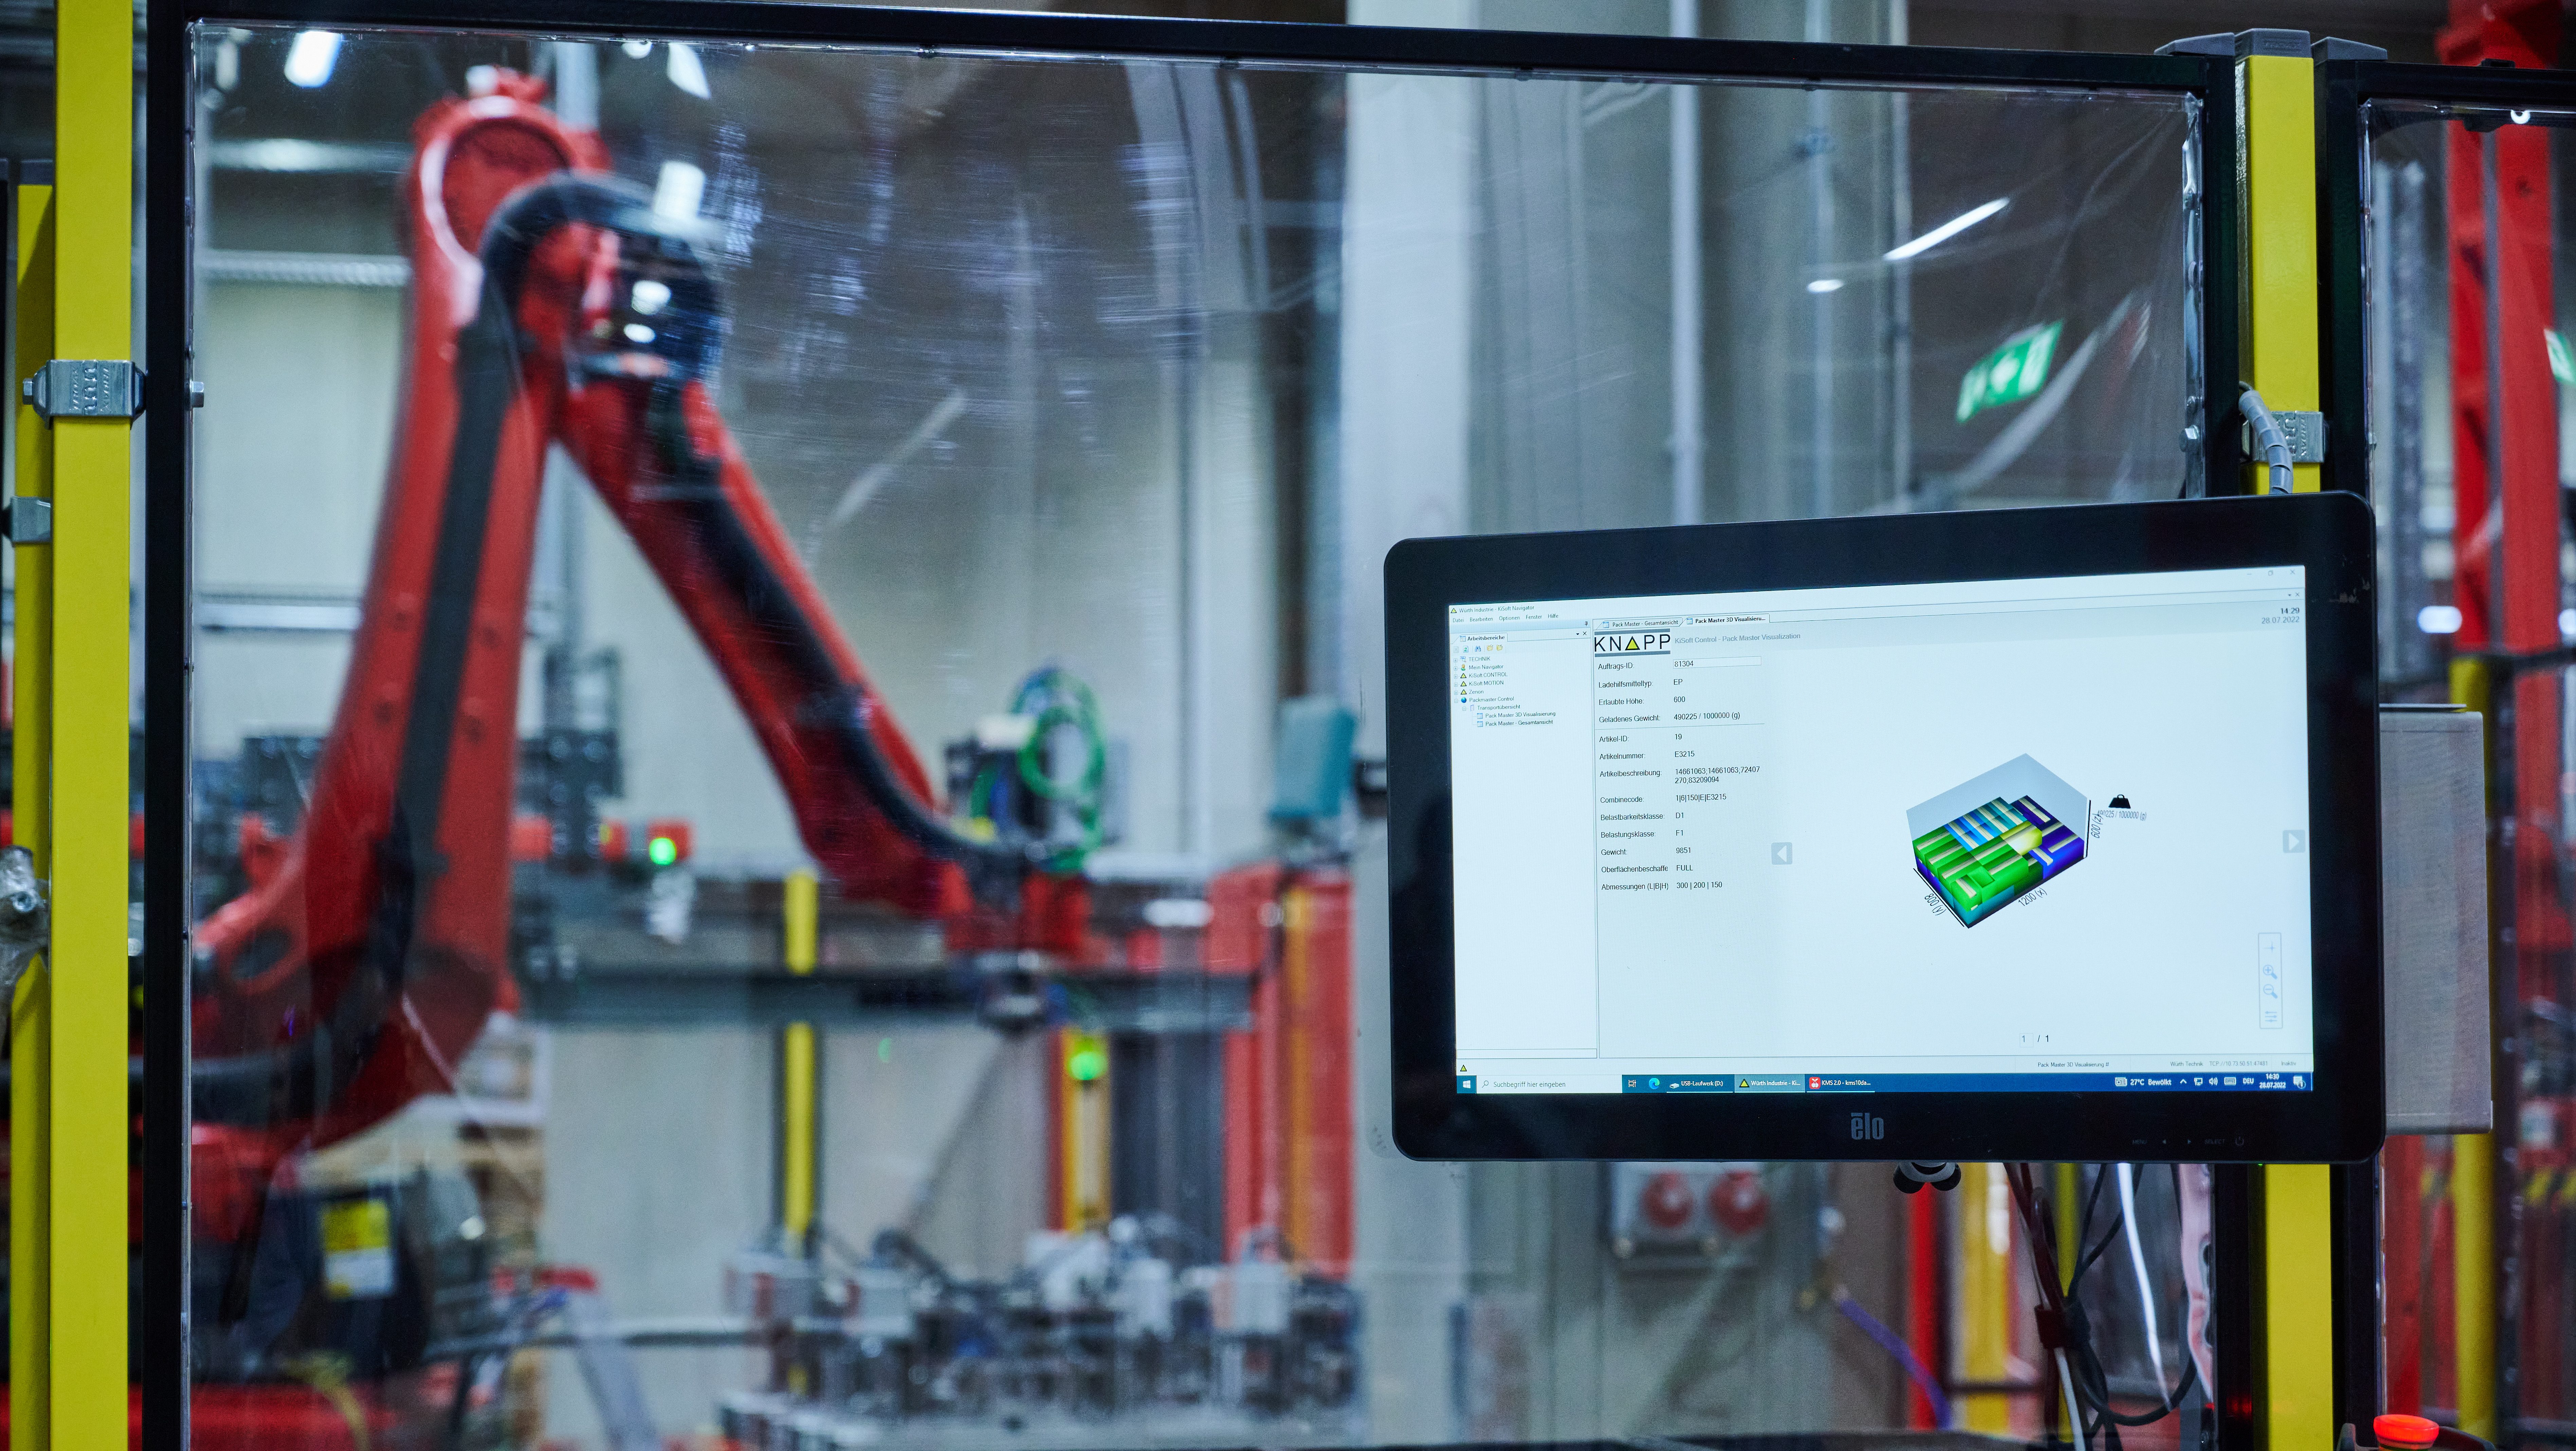 A screen shows the packing pattern that the robot in the background is following to load the pallet. The KiSoft software solutions play a key role in the automation solution.